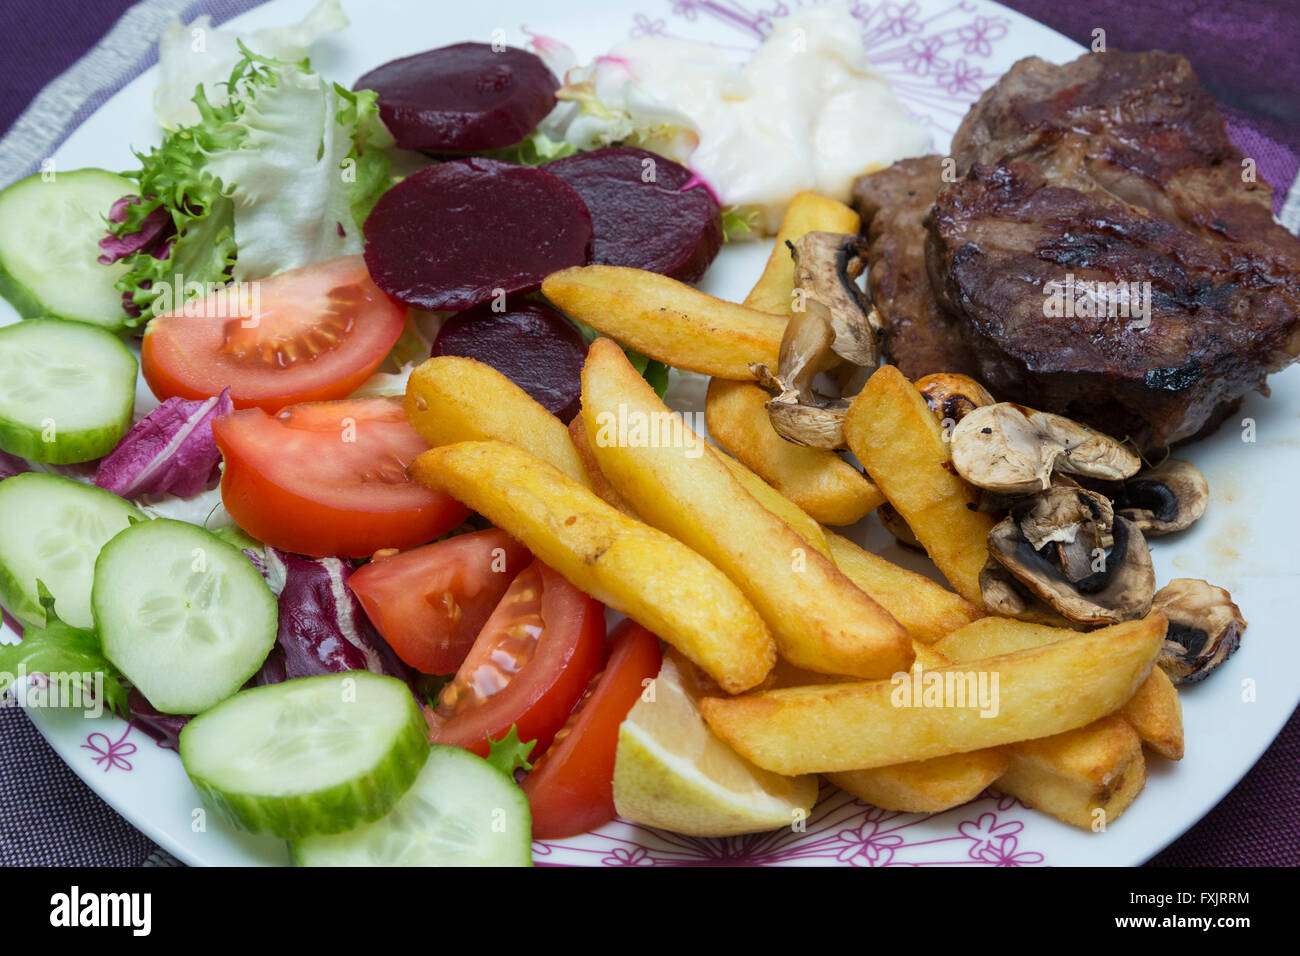 beef steak, potato chips and salad Stock Photo